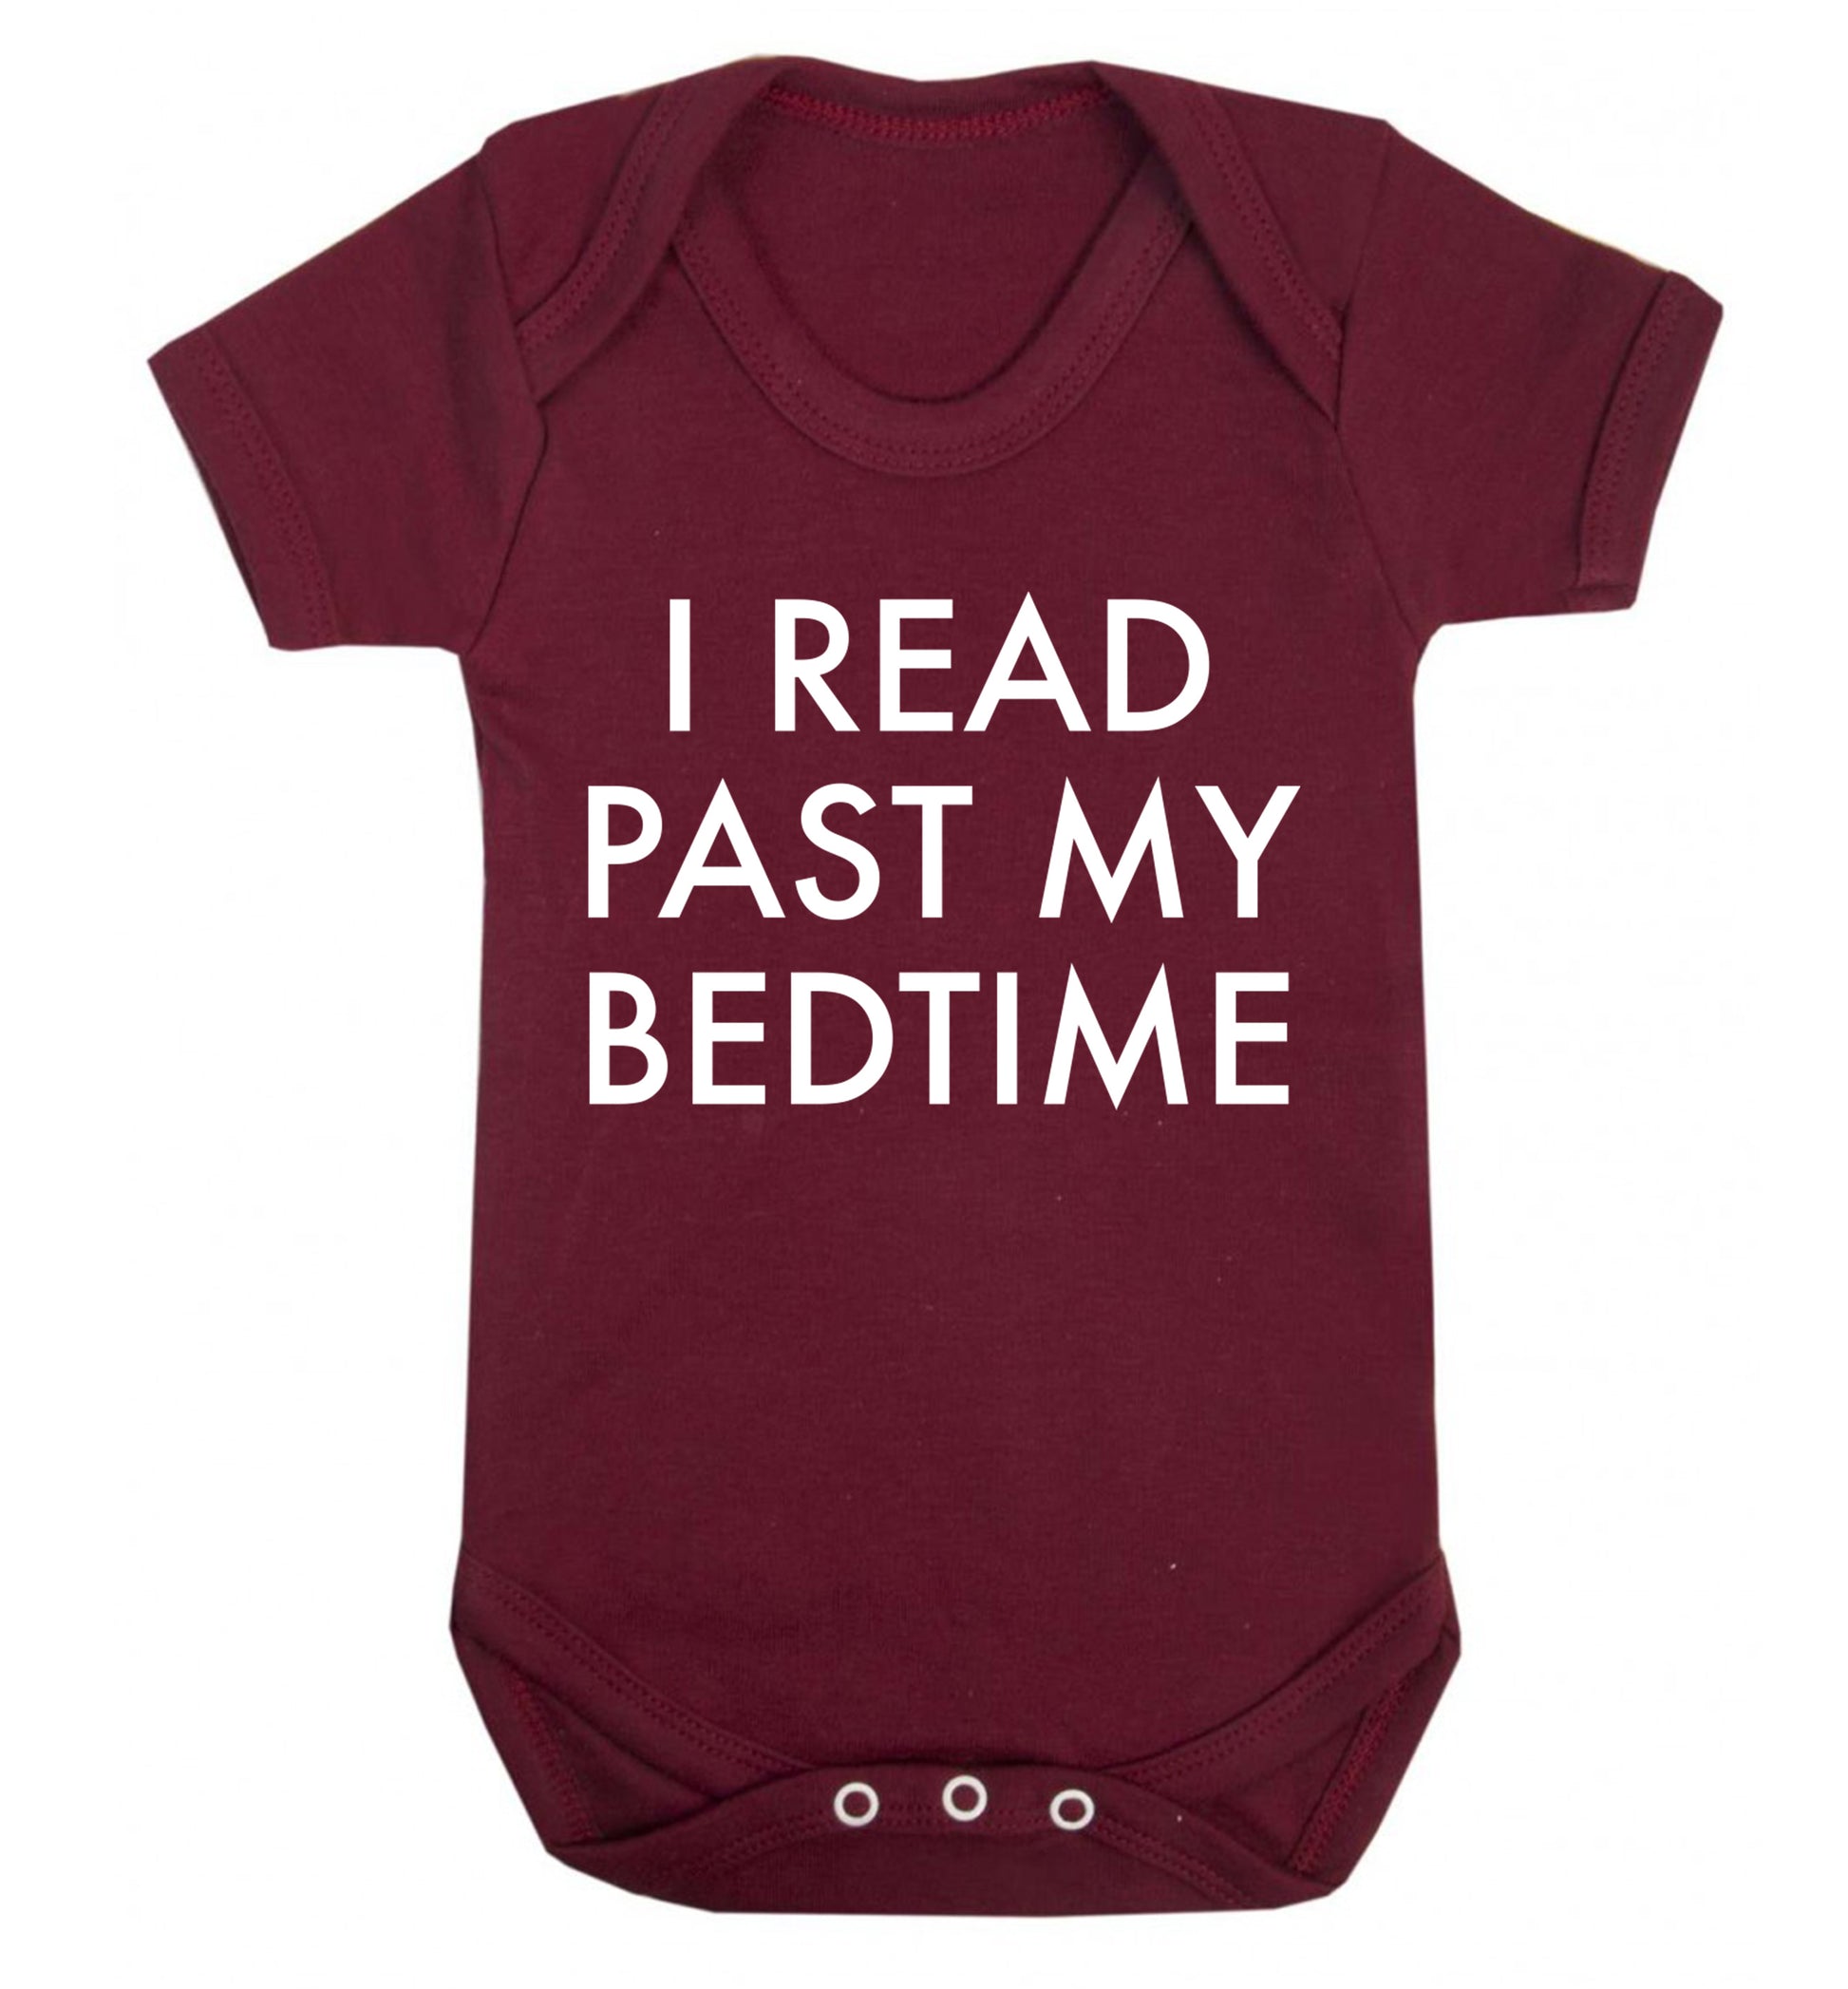 I read past my bedtime Baby Vest maroon 18-24 months